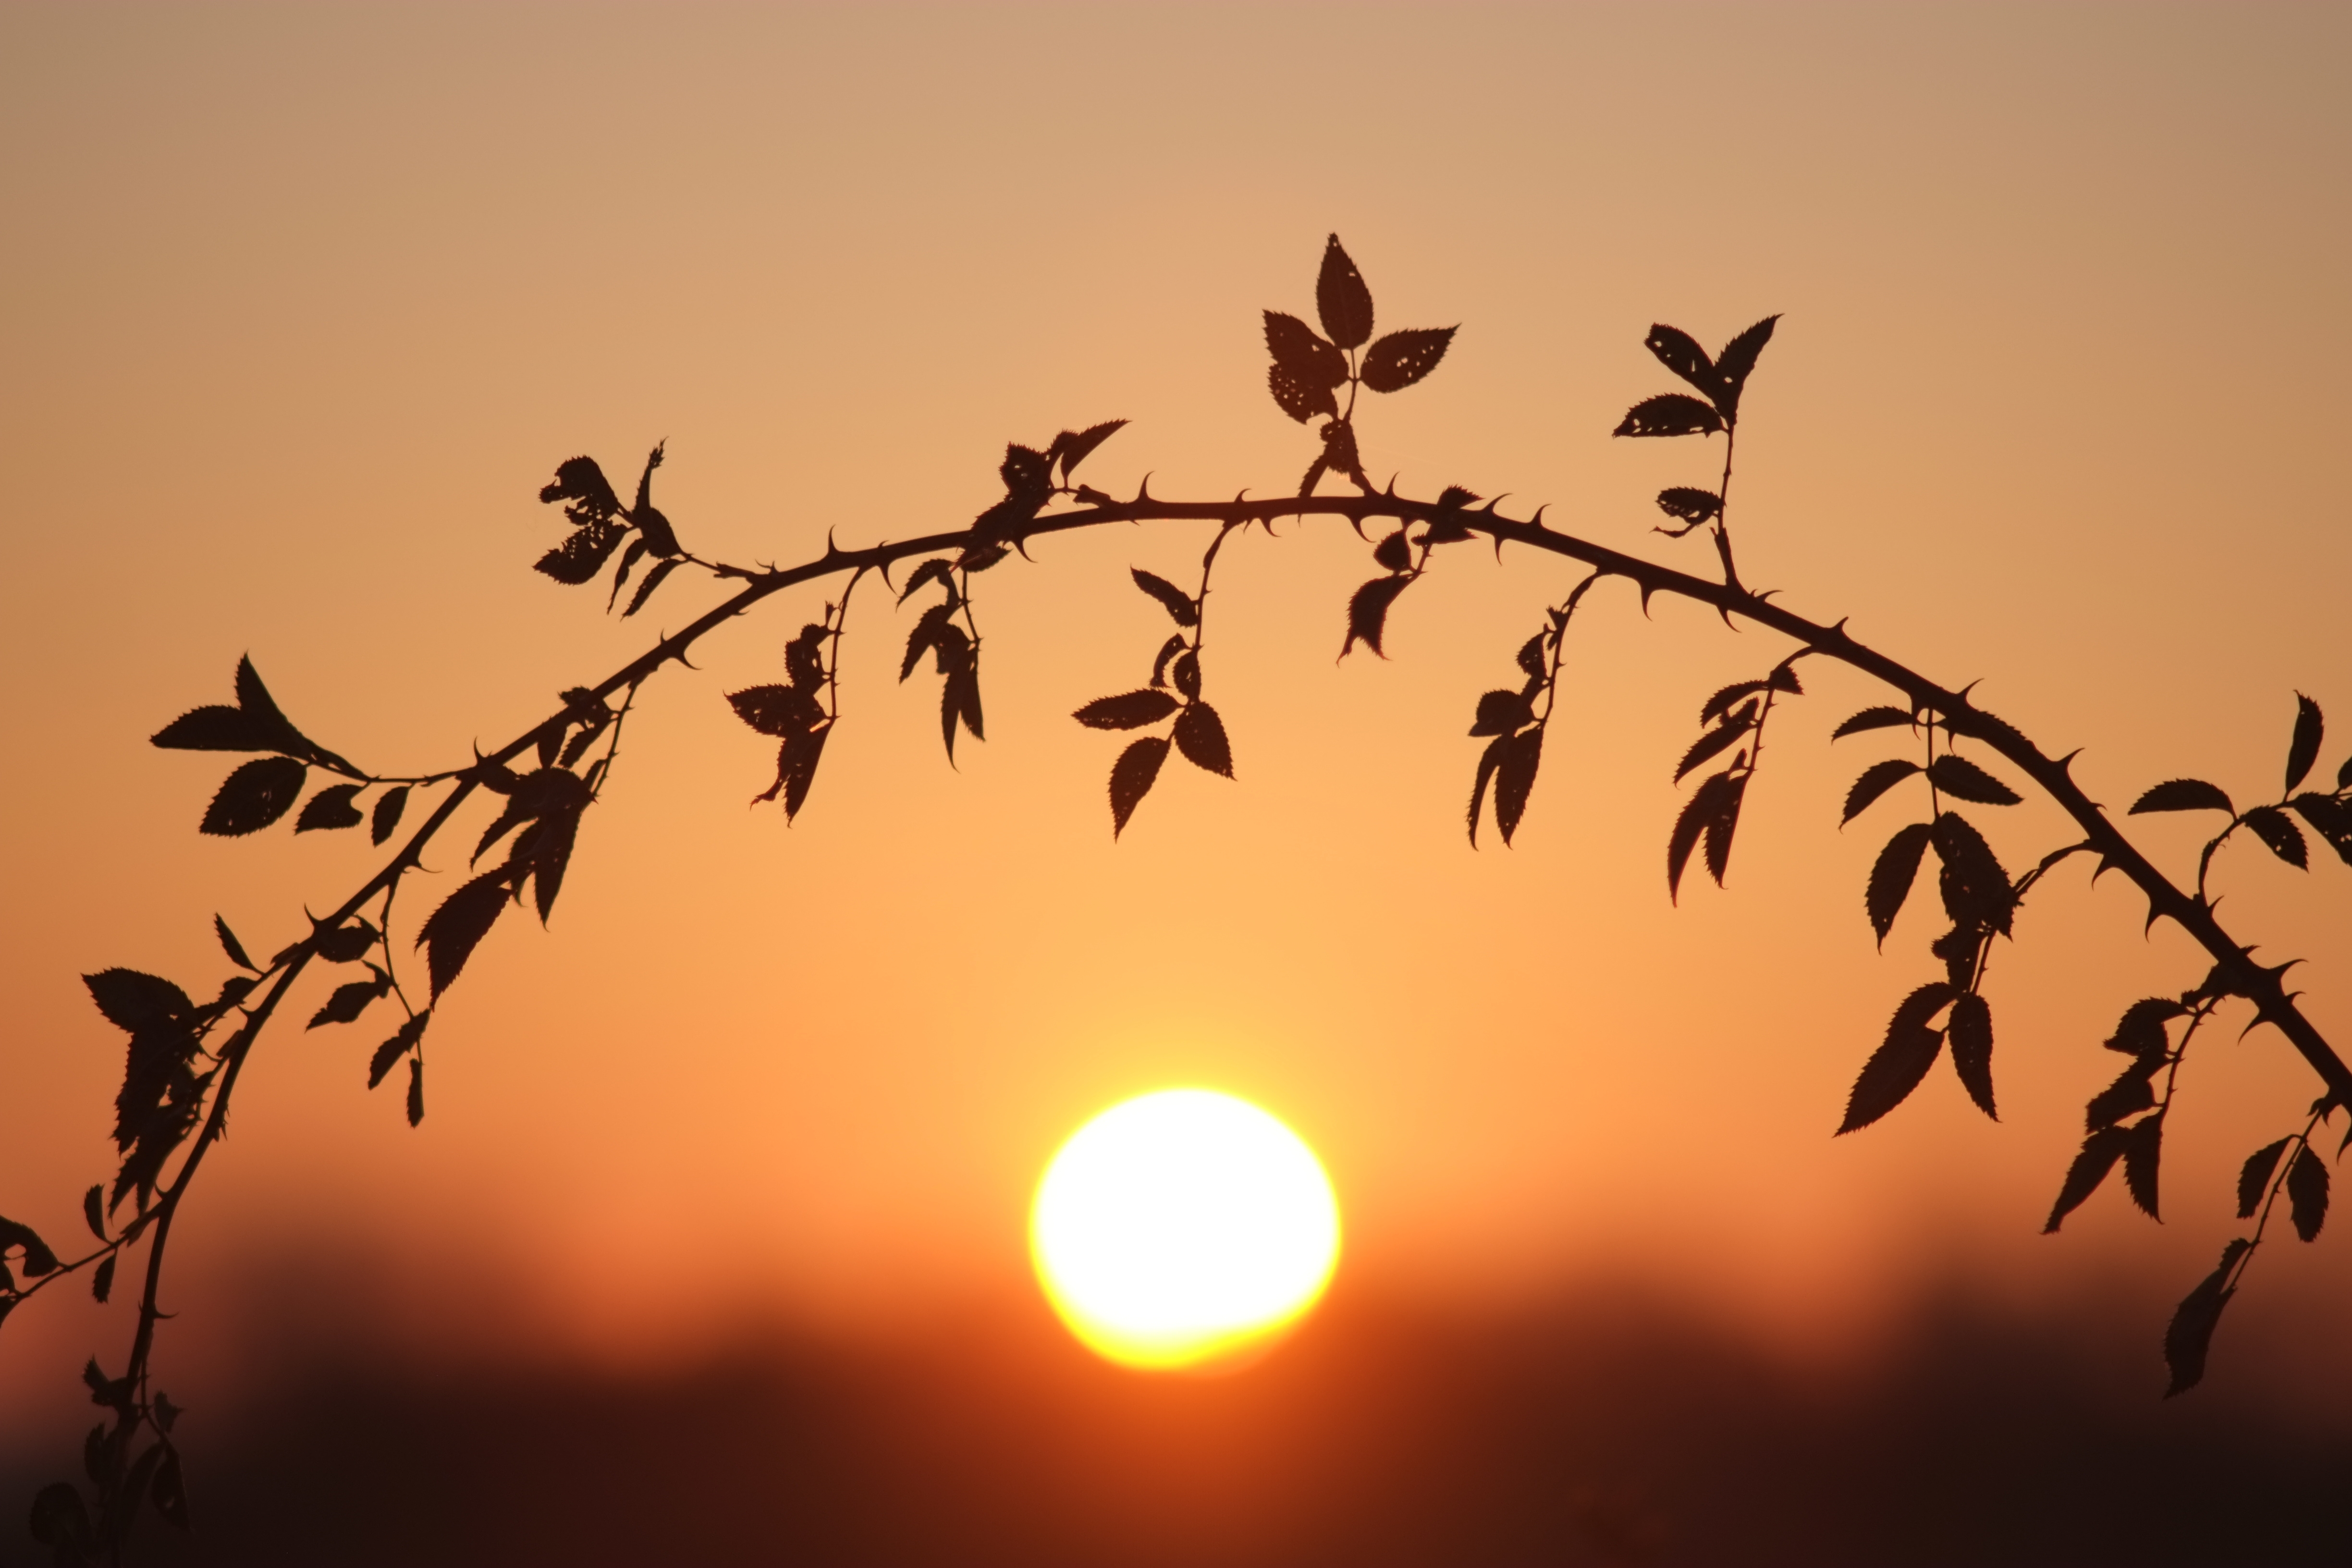 Sun In The Branches Wallpapers High Quality | Download Free